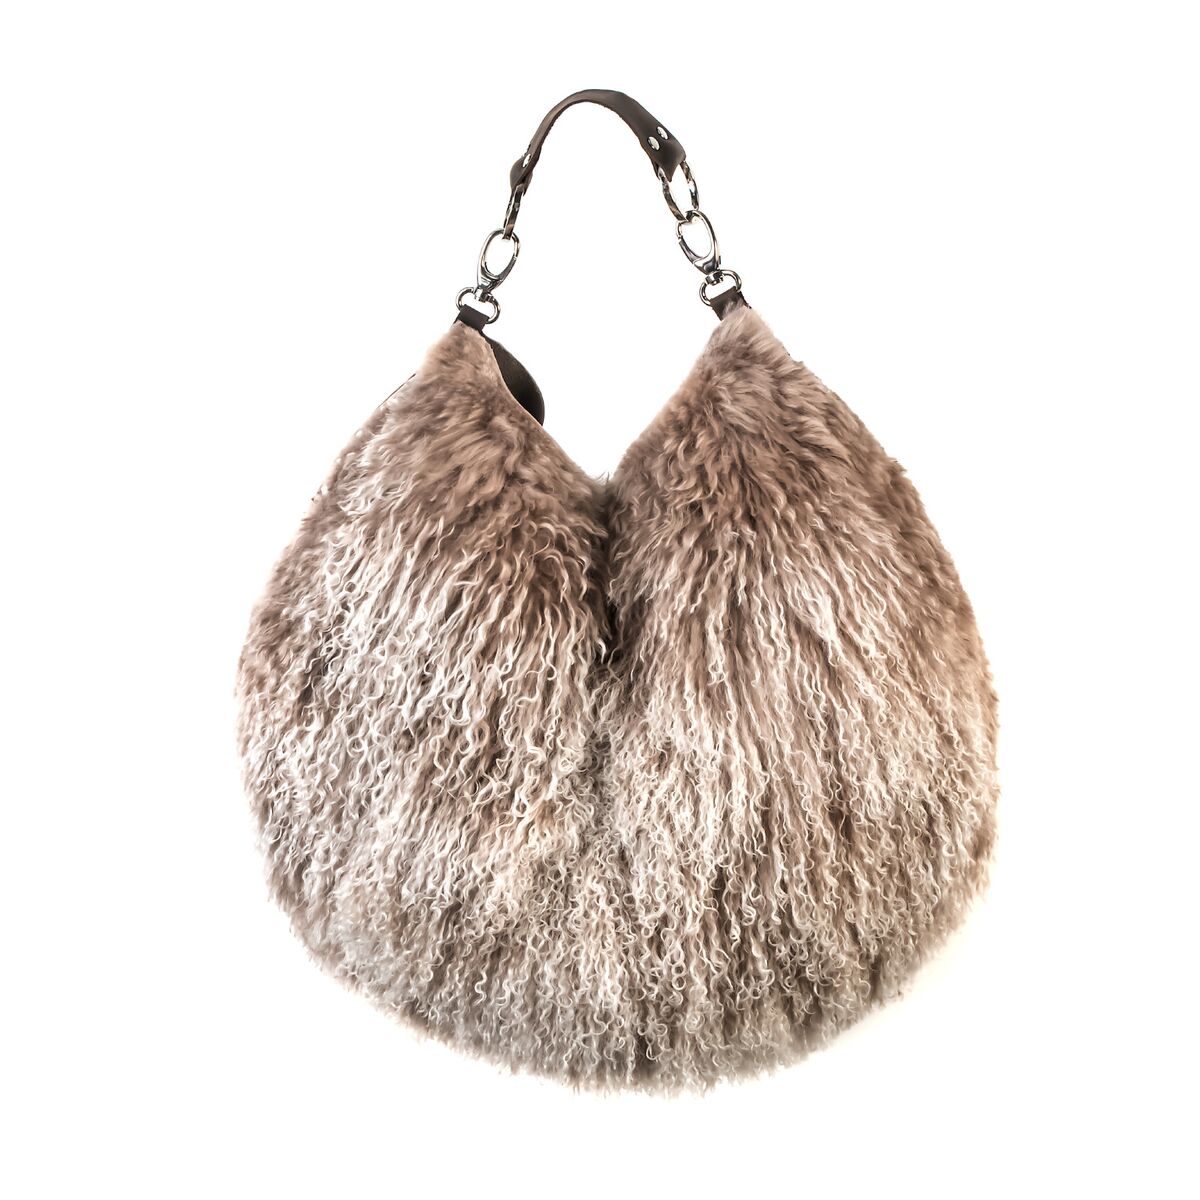   if my credit card hadn’t been declined, i would now own this tibetan wool bag by    stephanie wheat   . probably for the best. cool looking but really expensive  